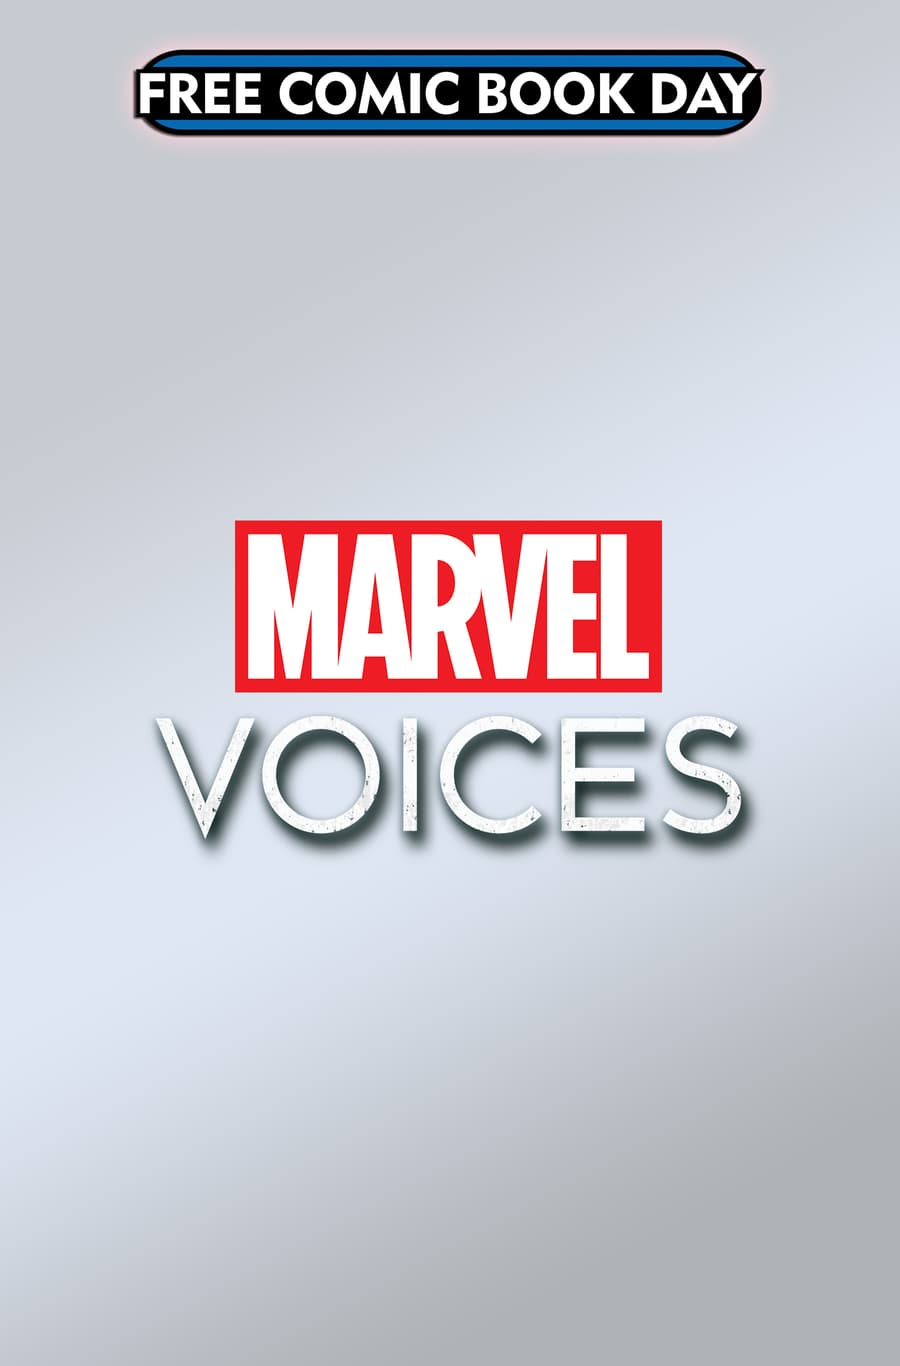 FREE COMIC BOOK DAY 2022: MARVEL'S VOICES #1